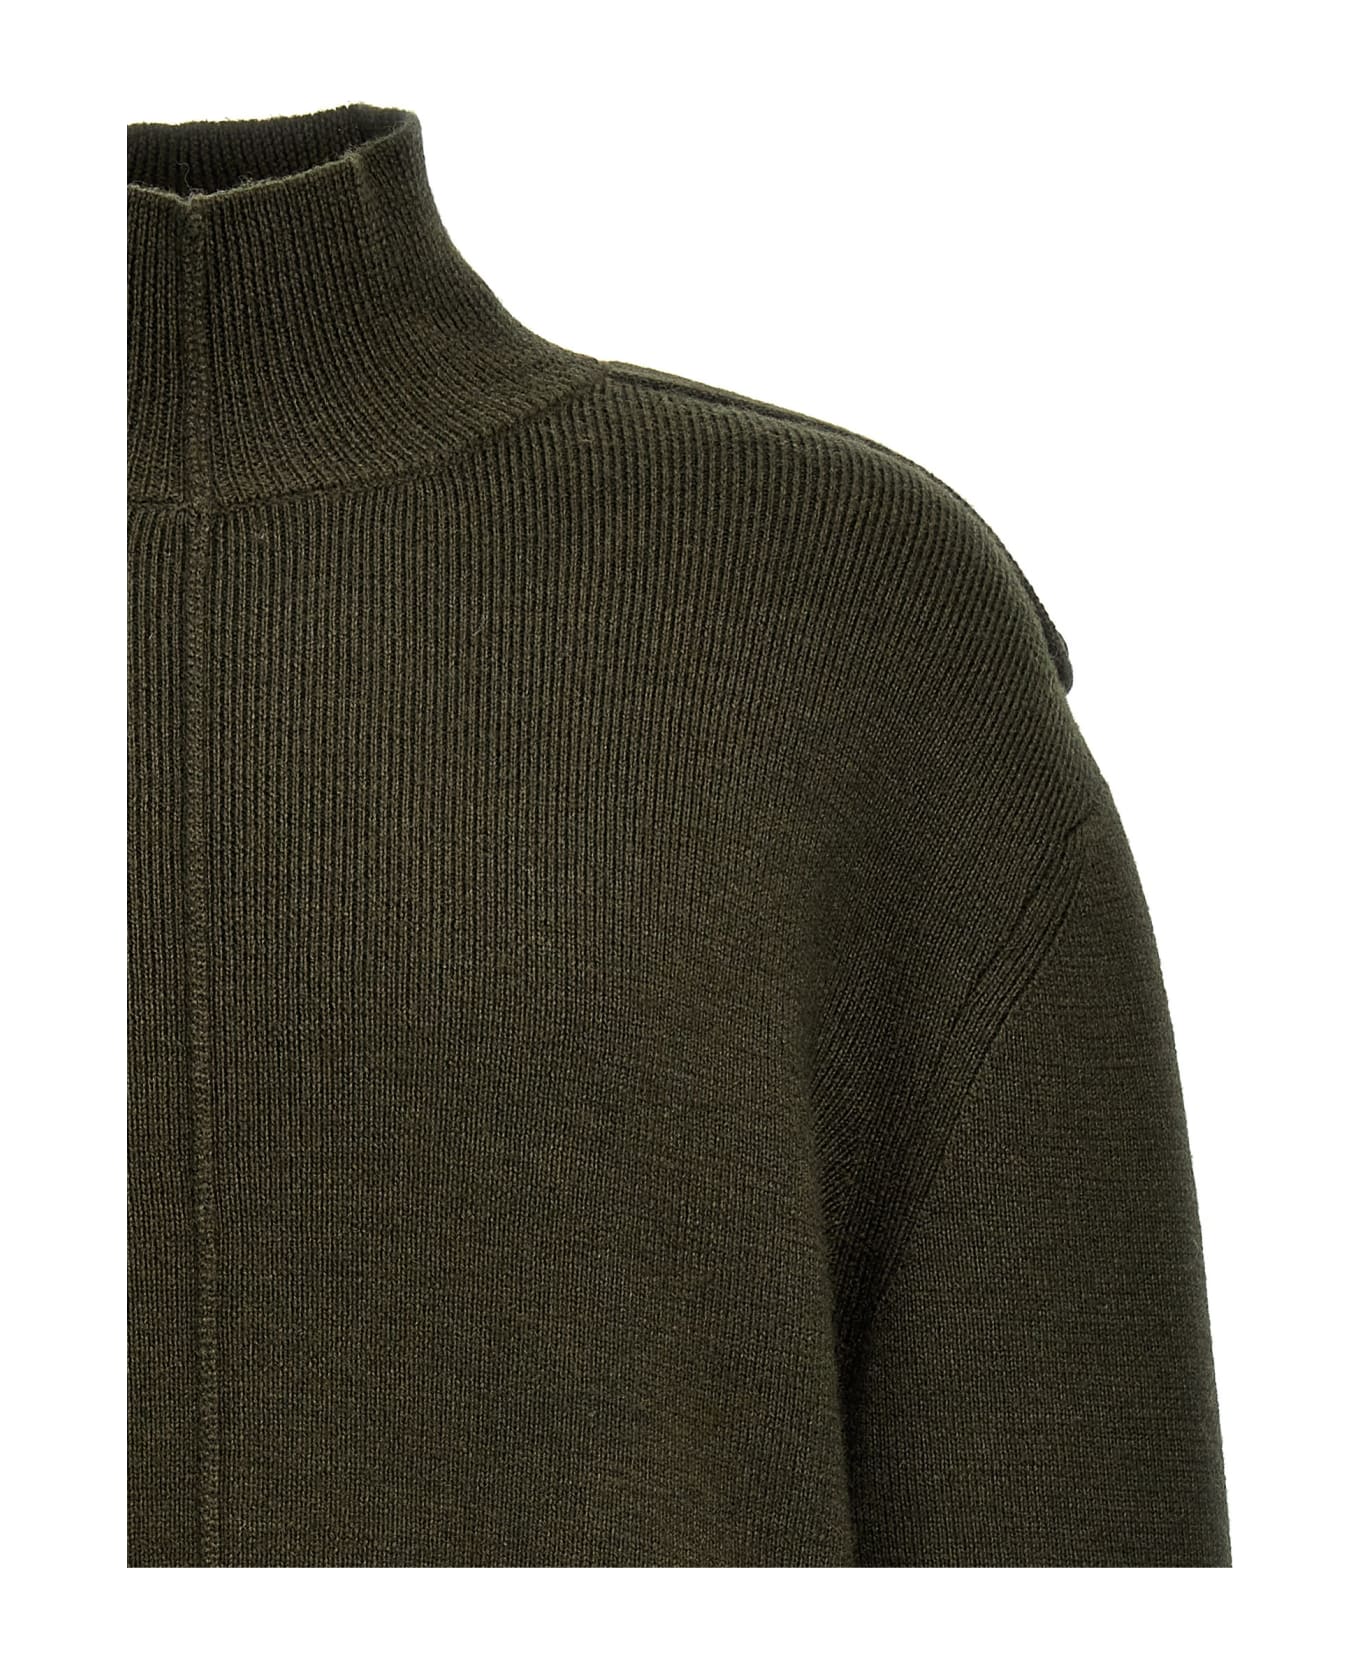 A-COLD-WALL 'utility' Sweater - Green ニットウェア